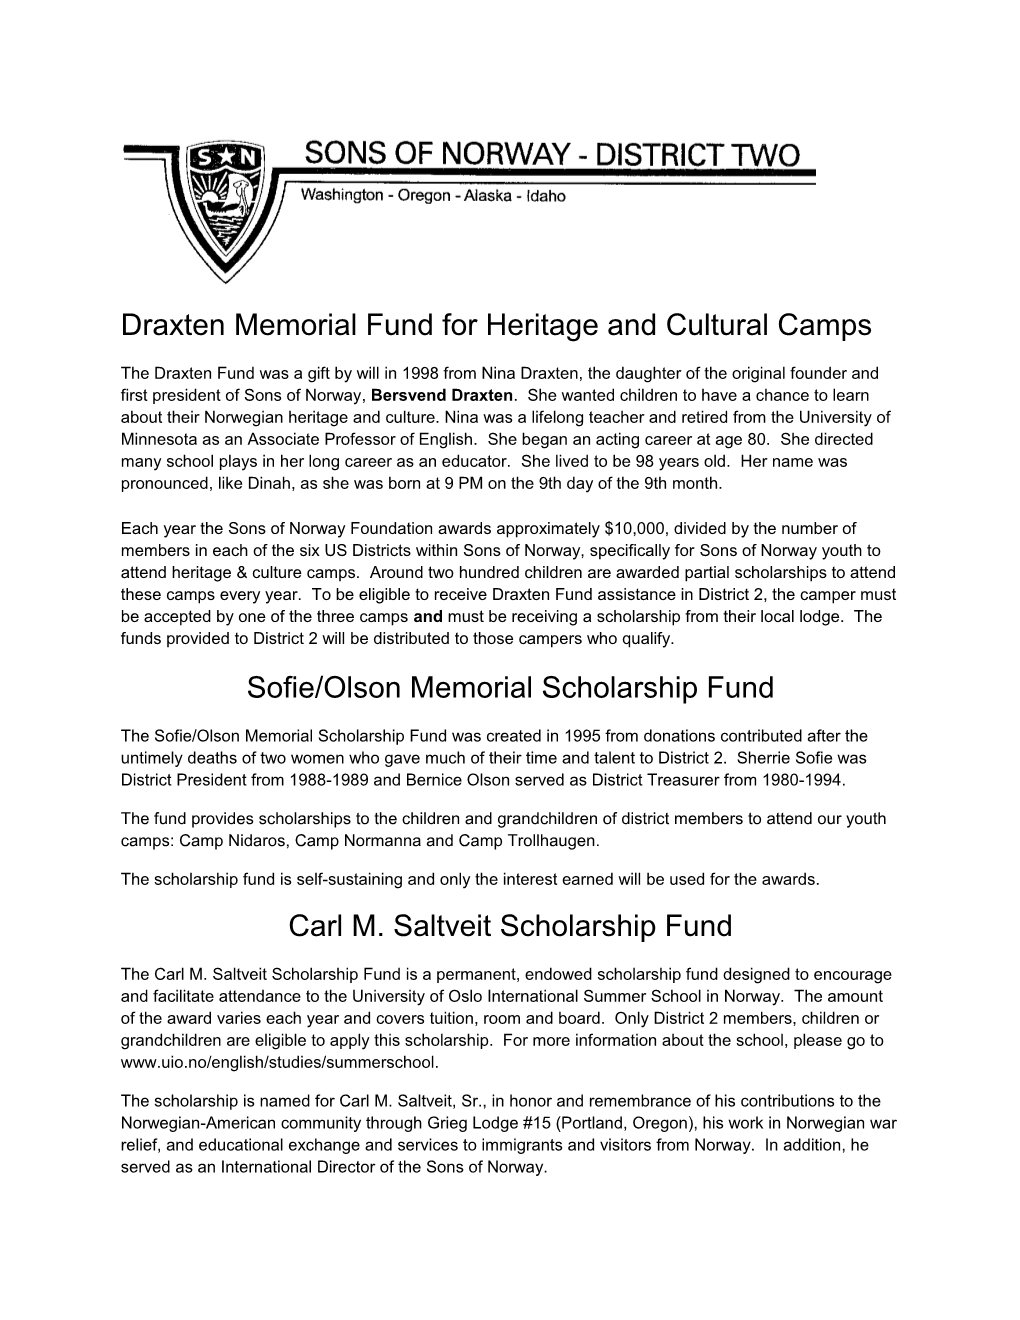 Draxten Memorial Fund for Heritage and Cultural Camps